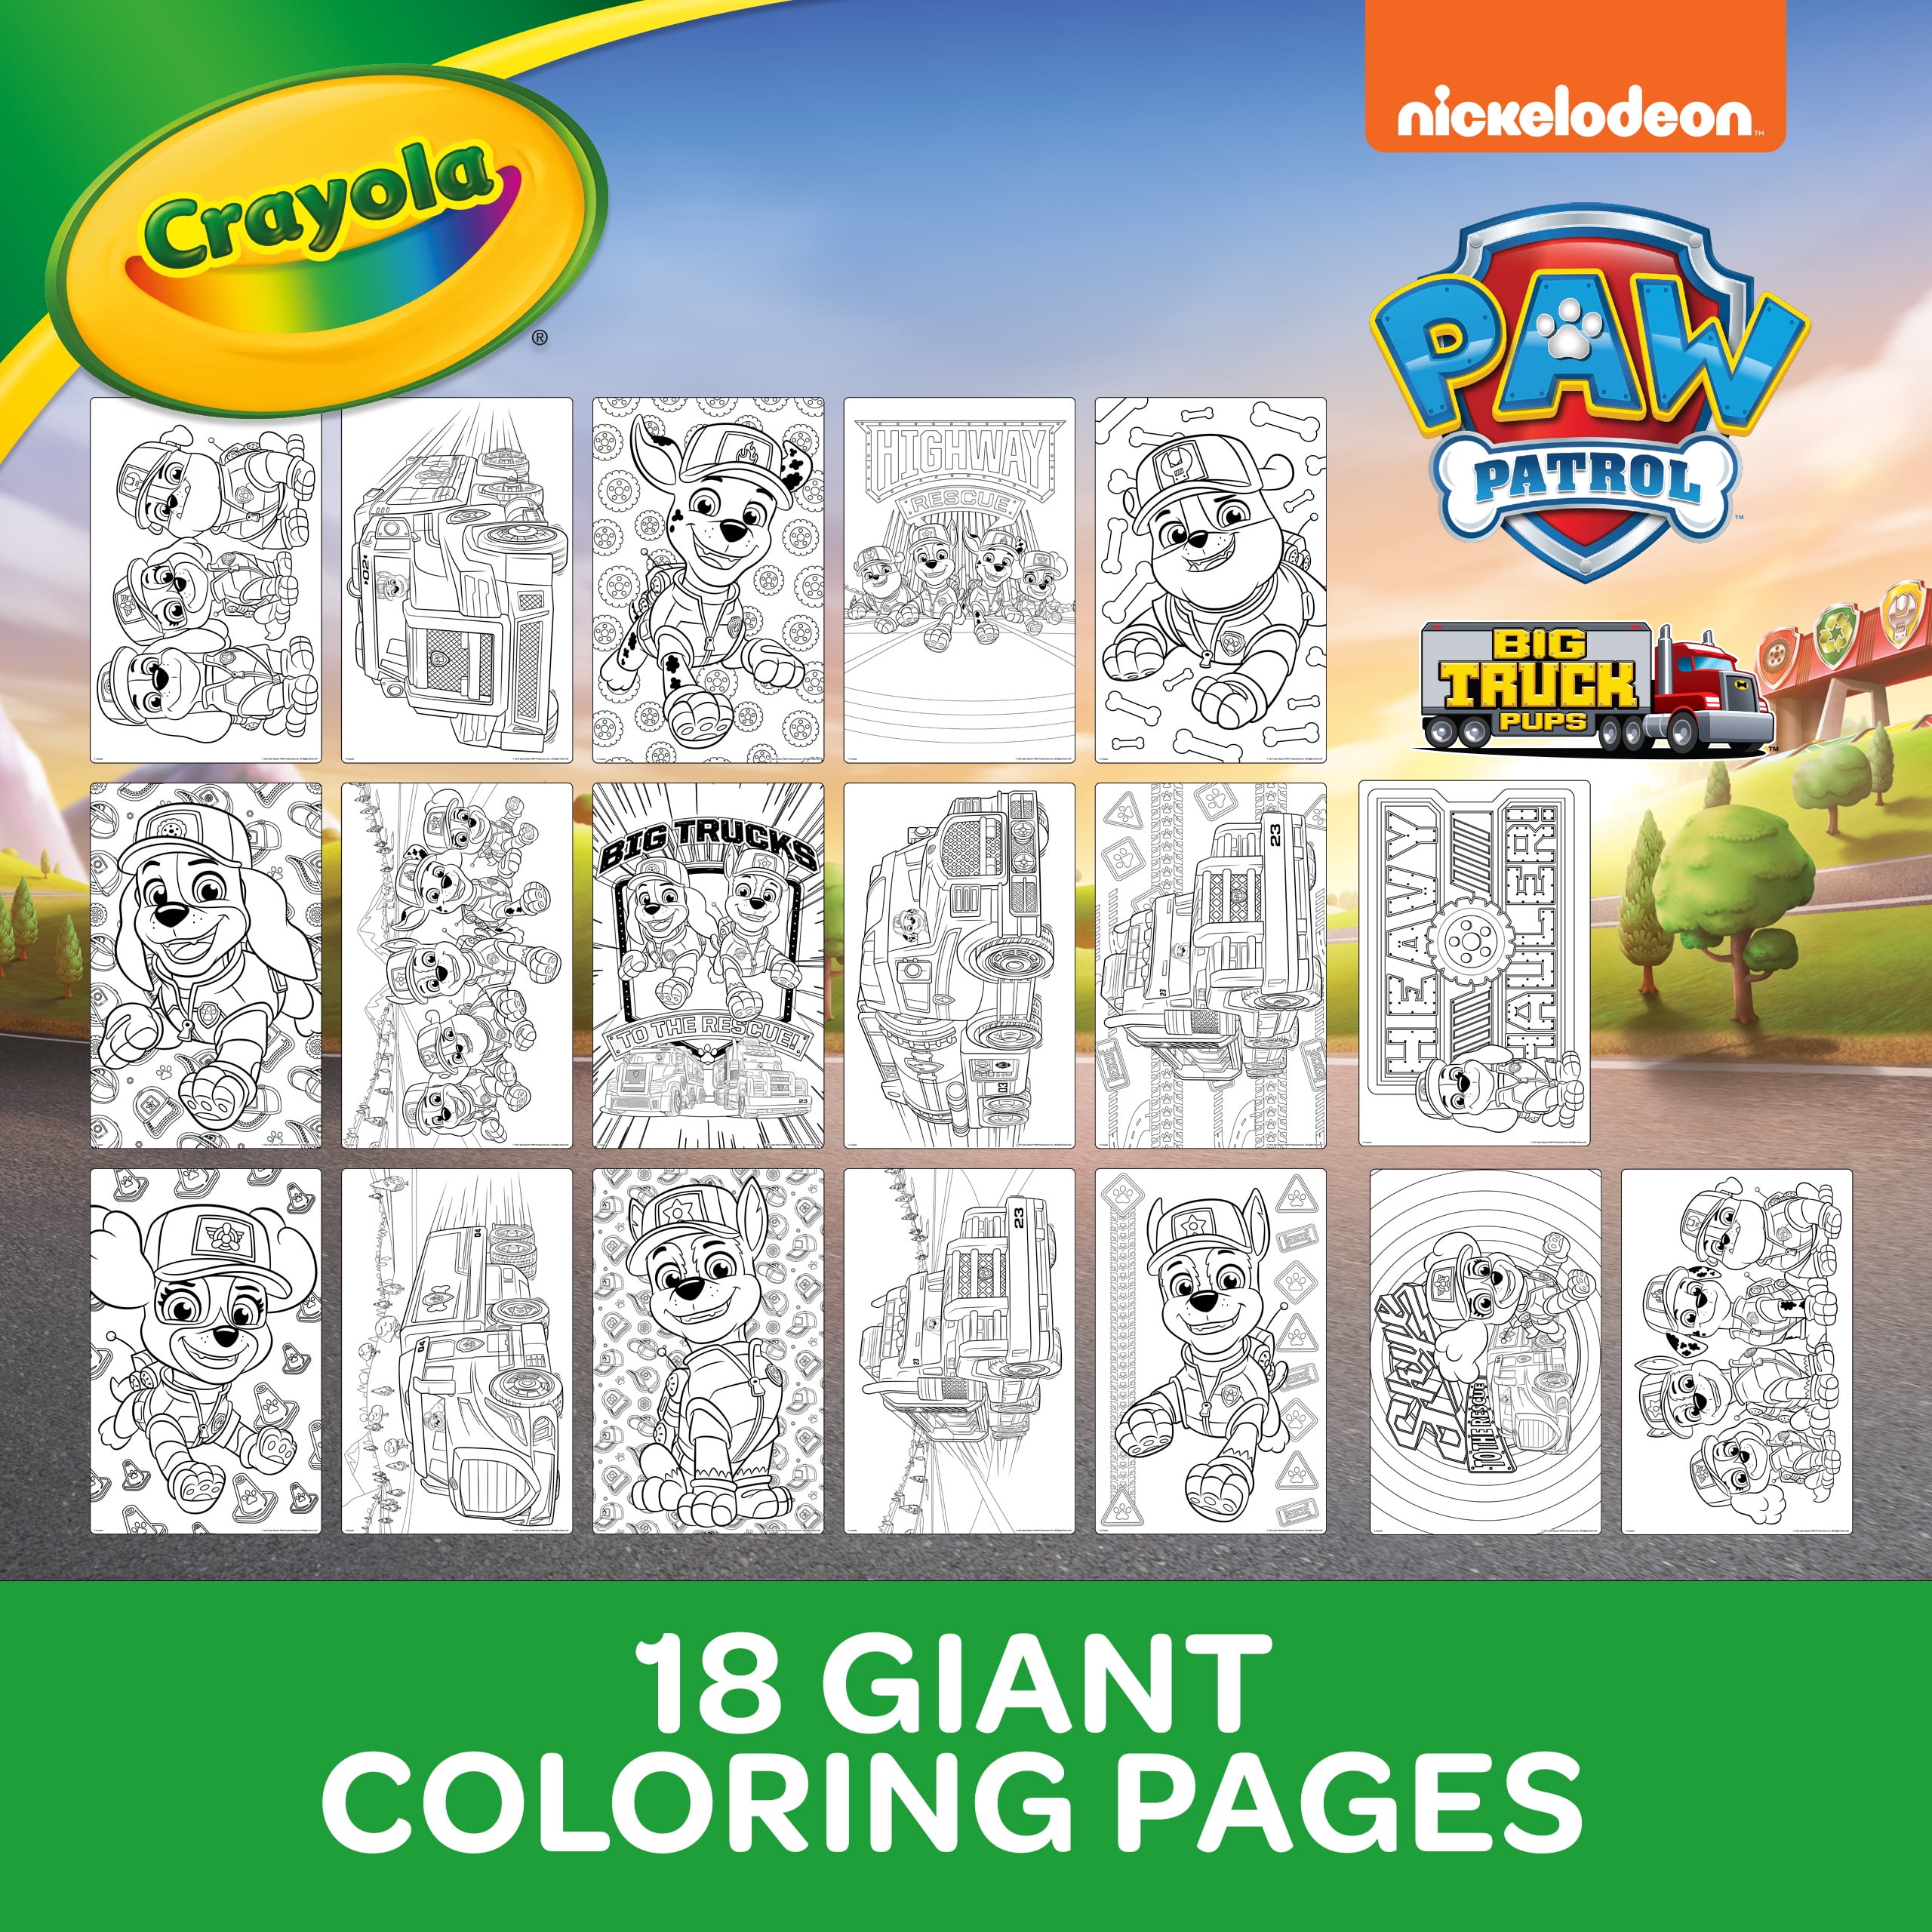 Paw Patrol Giant Coloring Book, 18 Pages, Mardel